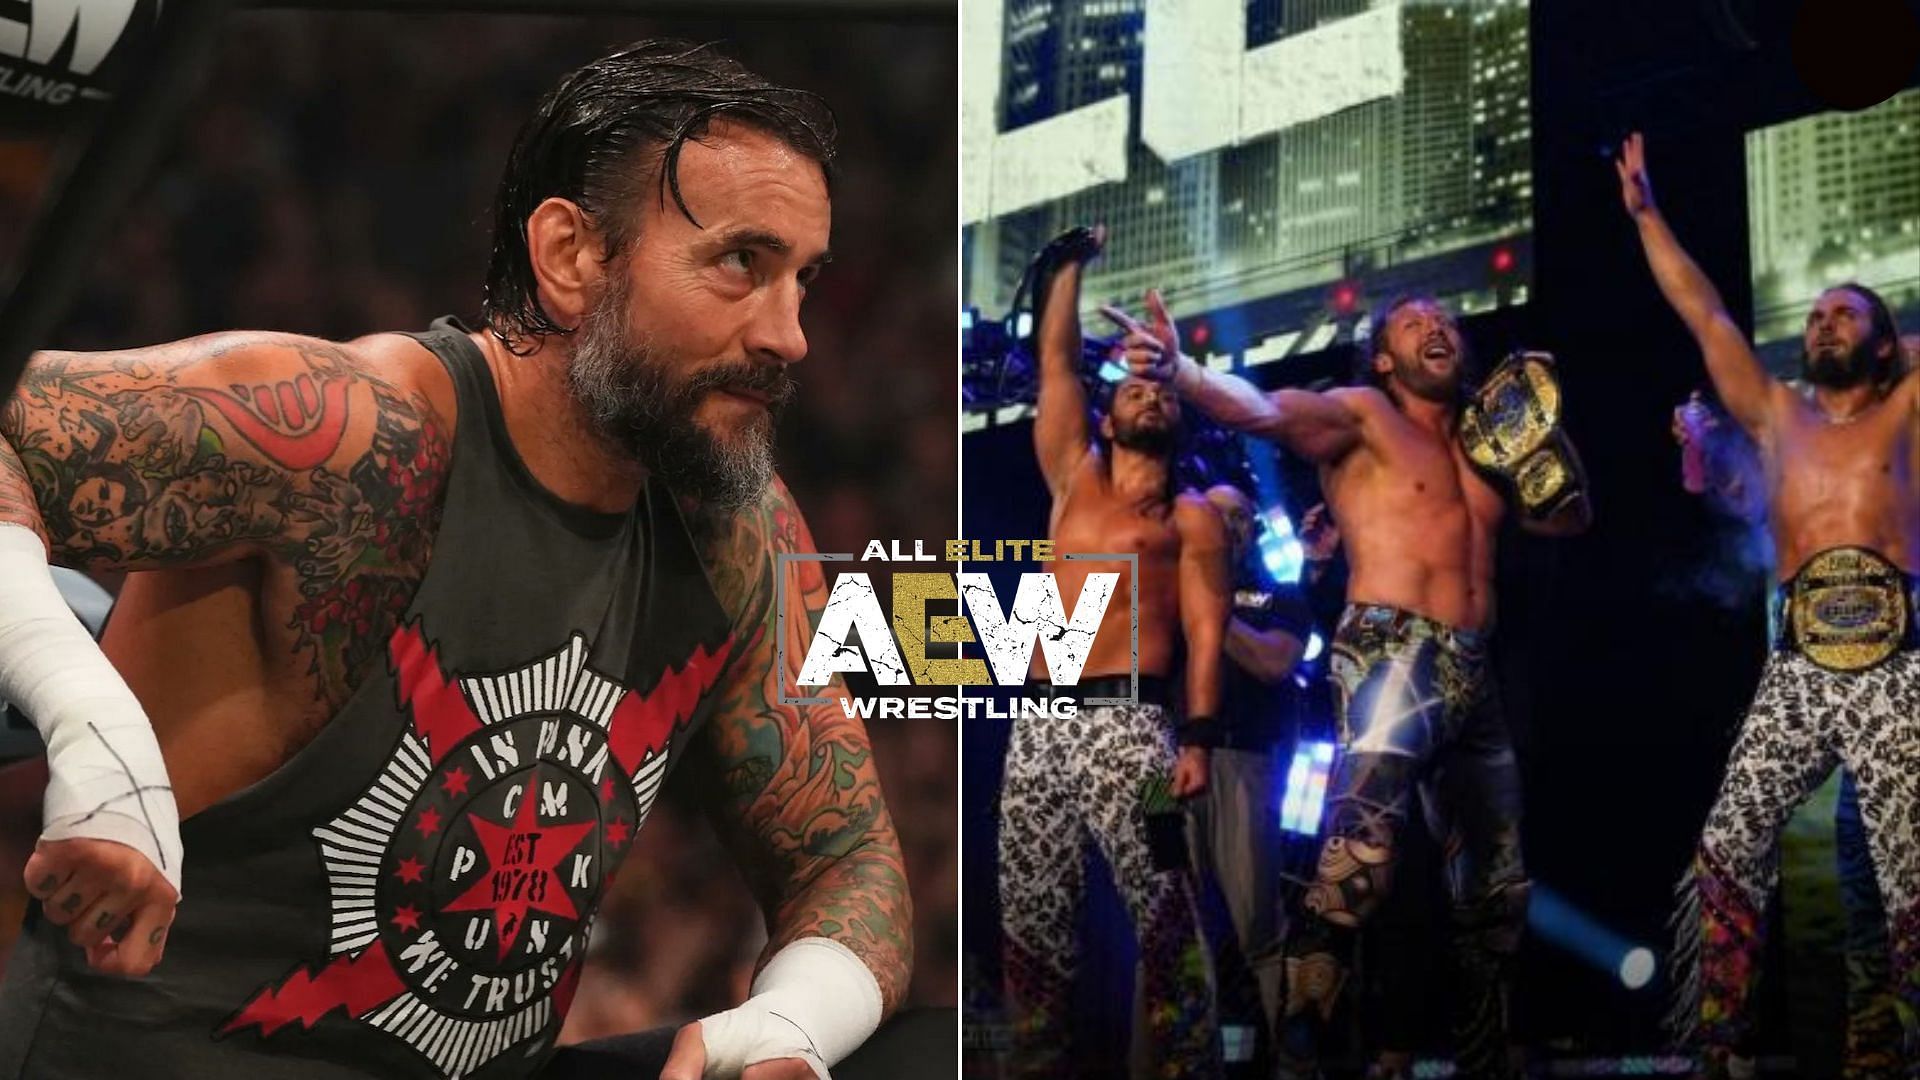 Surprising potential reason why CM Punk and The Elite brawled during AEW All Out media scrum - Reports